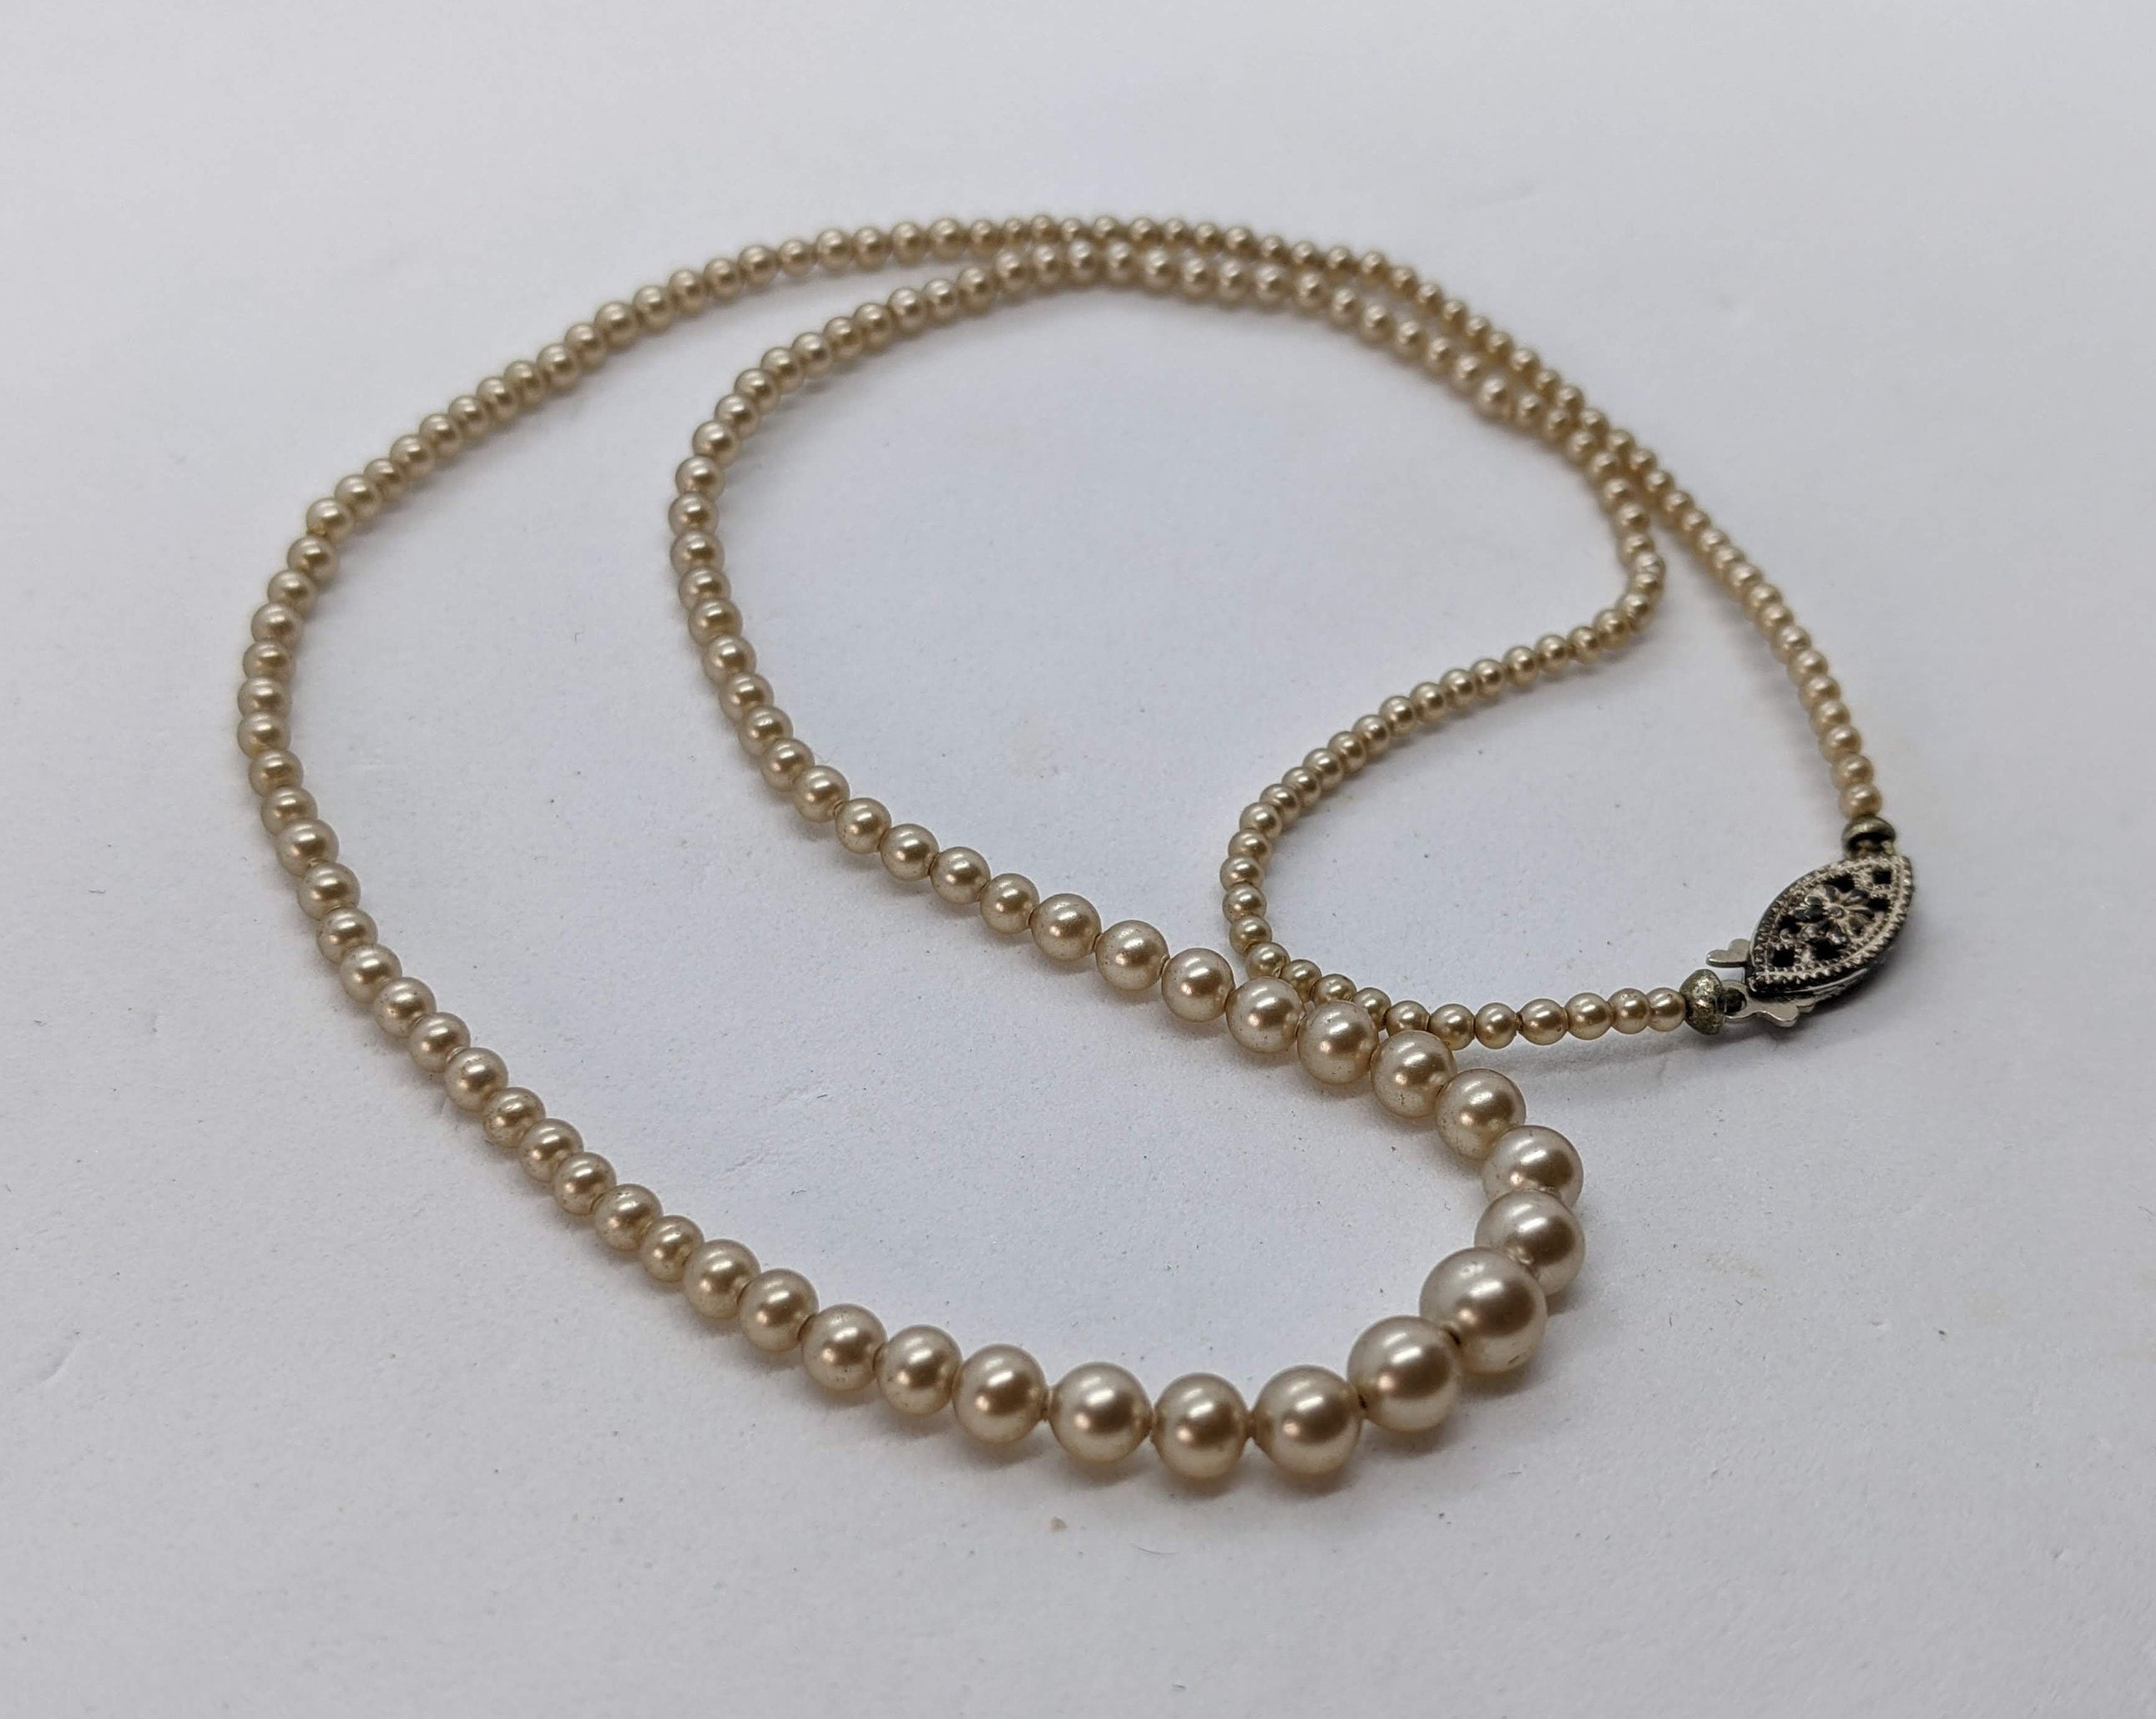 14K Yellow or White Gold Round Ball Clasp for Single Row Necklace